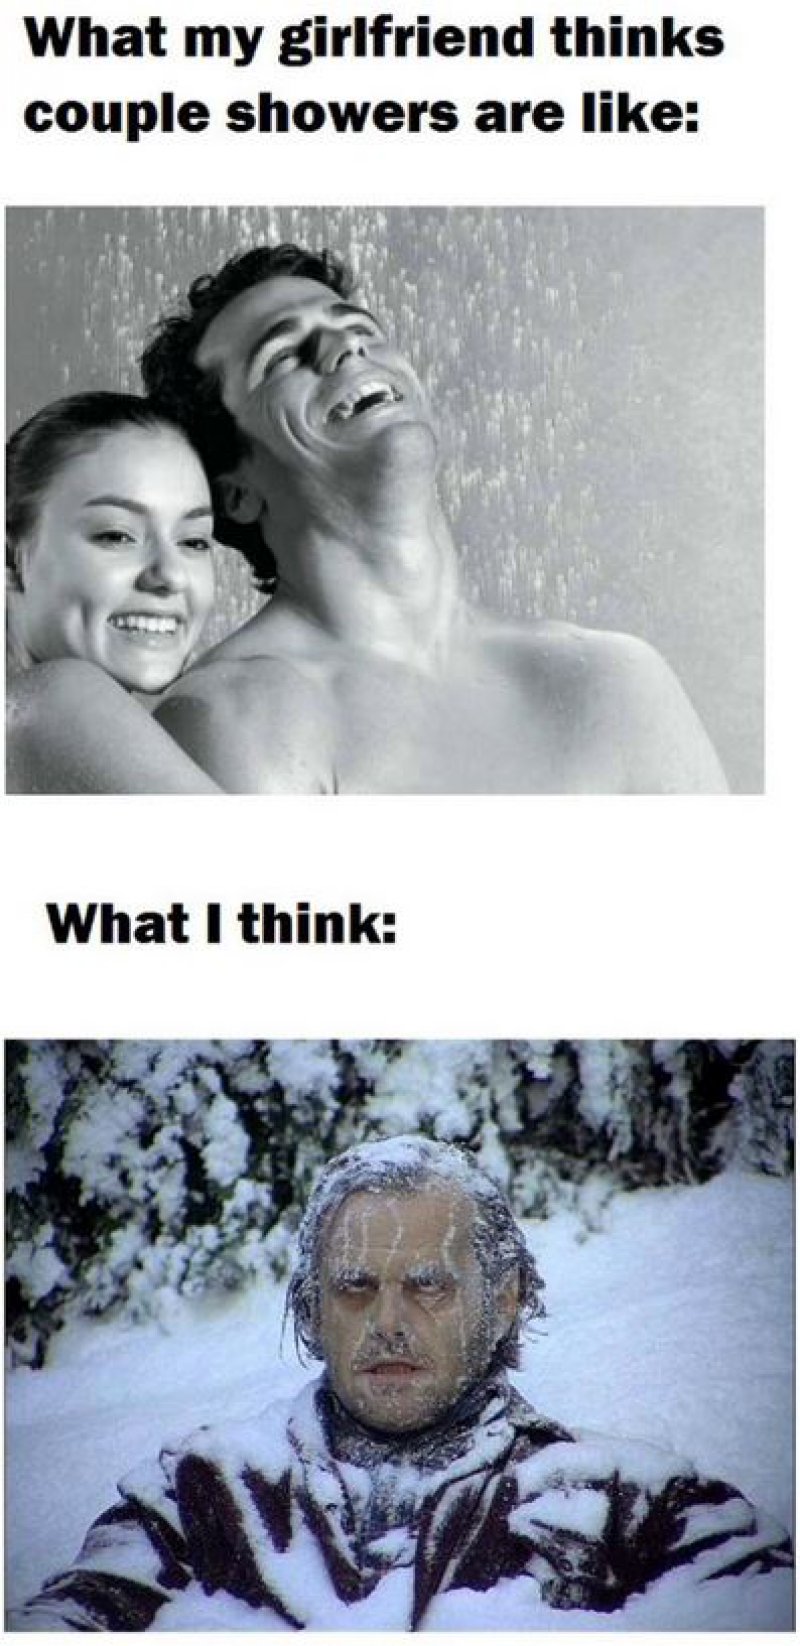 Couple Showers-15 Hilarious Differences Between What Your Girlfriend Thinks And Reality